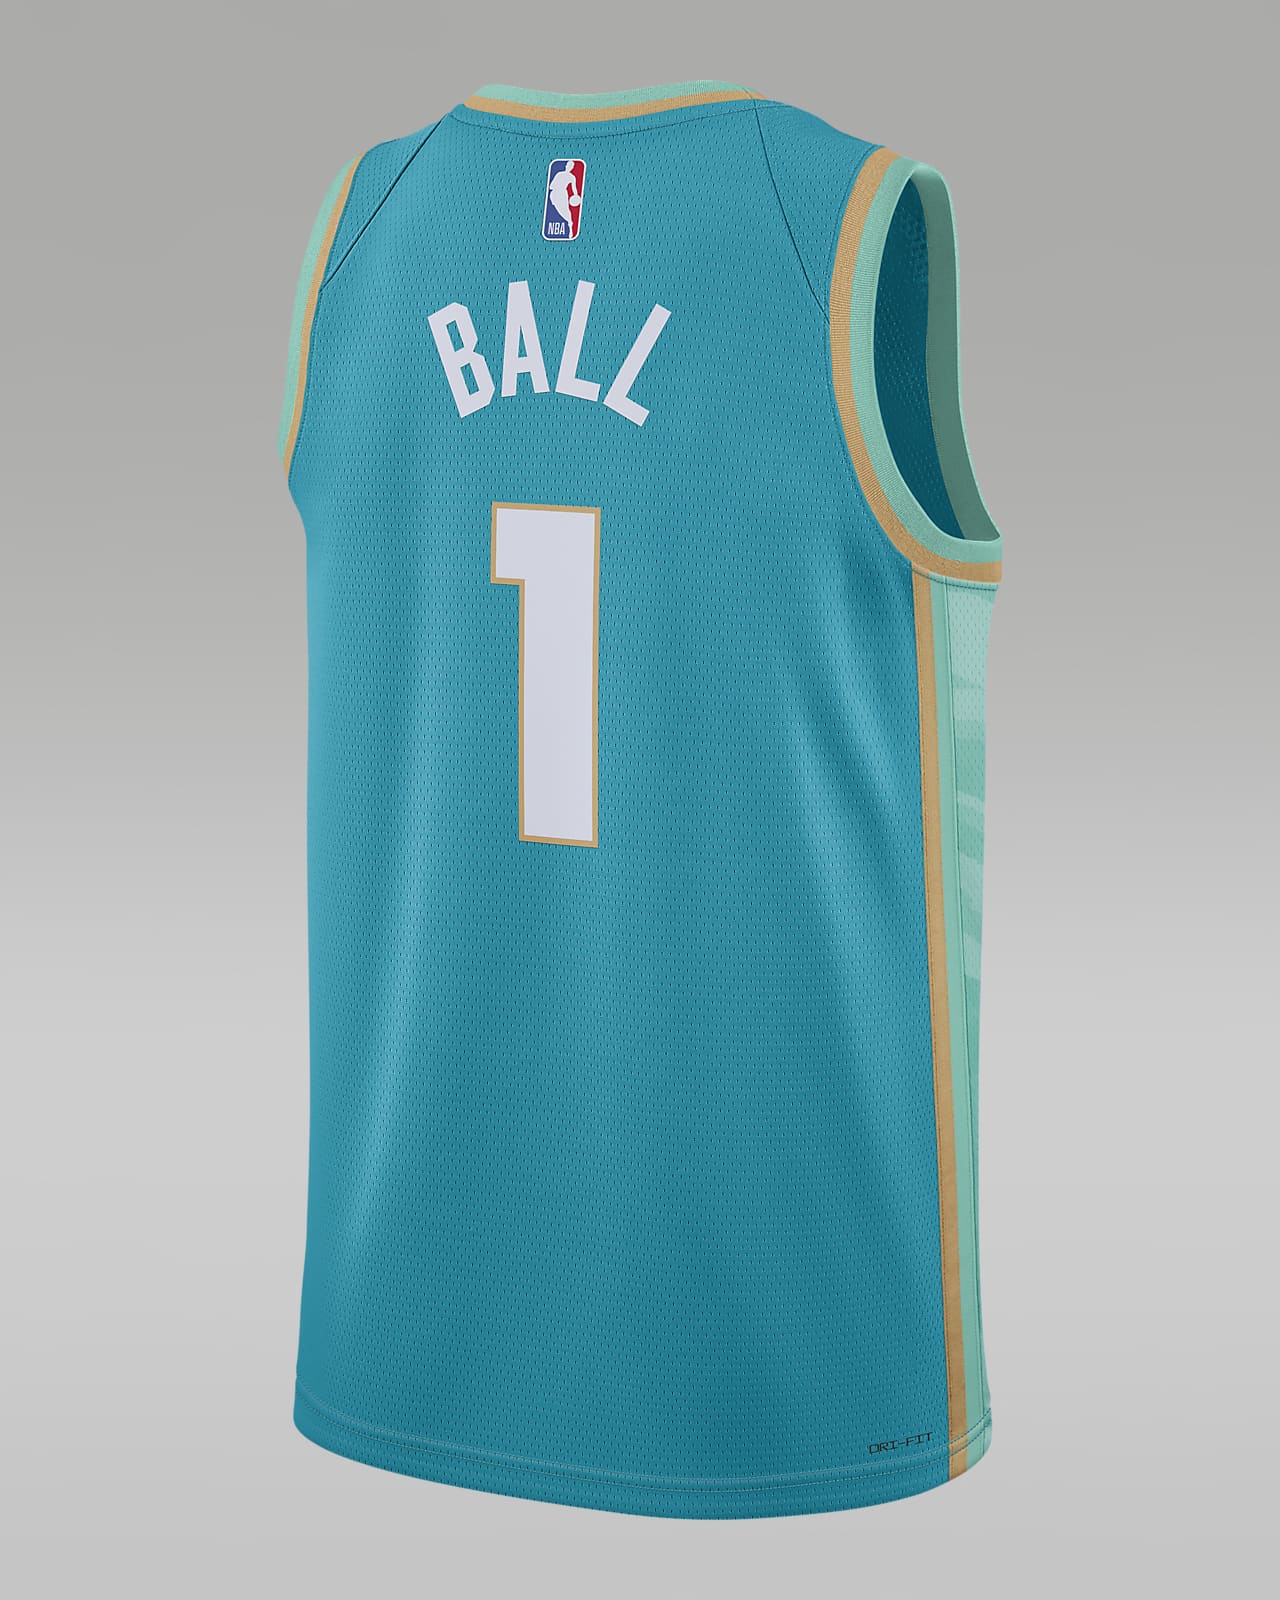 LaMelo Ball YOUTH Charlotte Hornets Jersey Buzz City – Classic